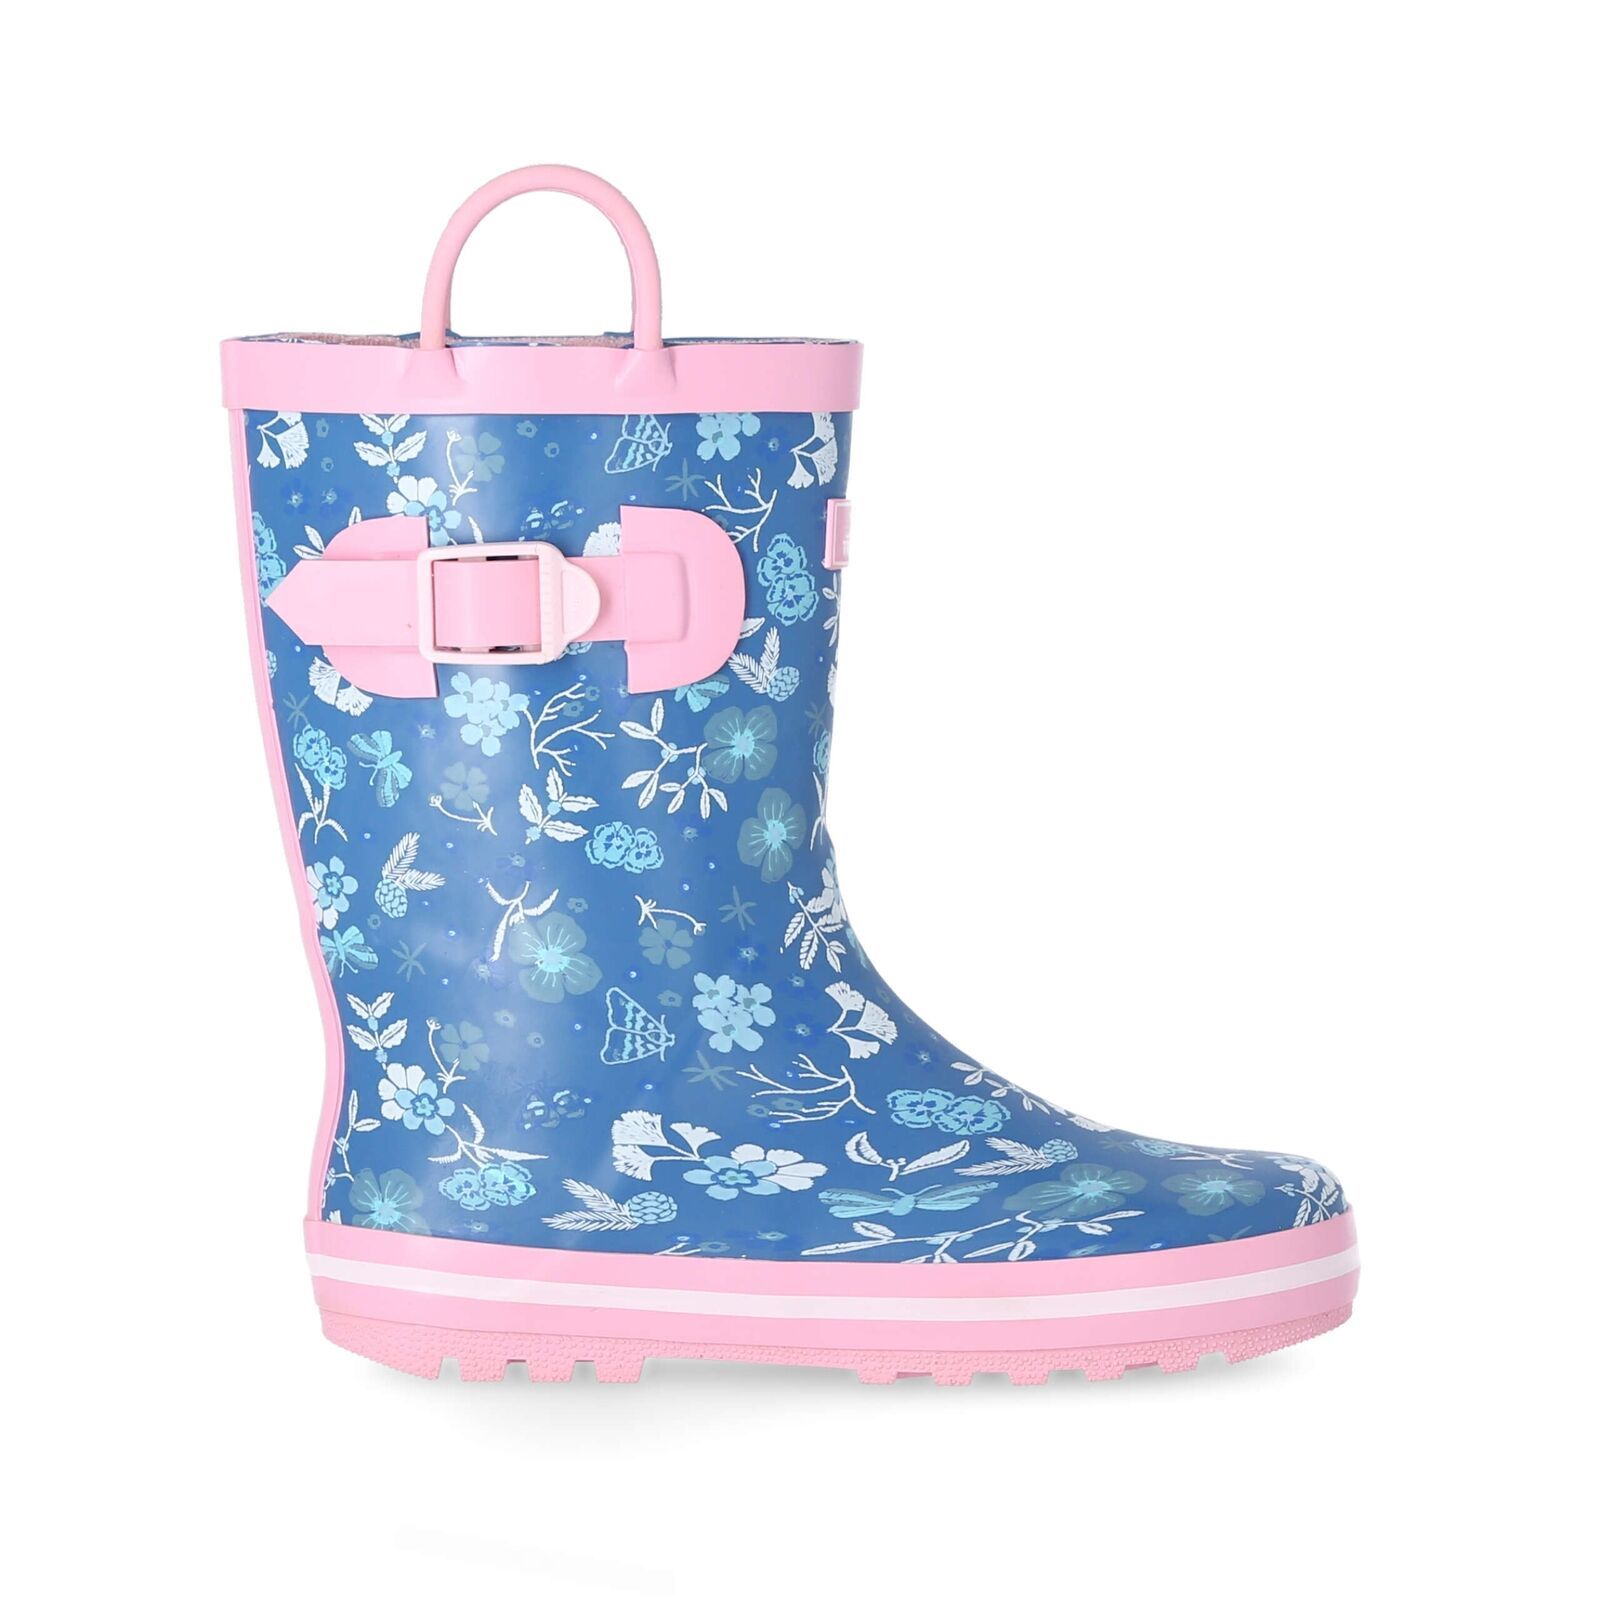 Printed welly boot. Adjustable buckle. Cushioned footbed. Durable grip sole. Waterproof. Upper: Rubber, Lining: Textile, Insole: EVA, Outsole: Rubber.